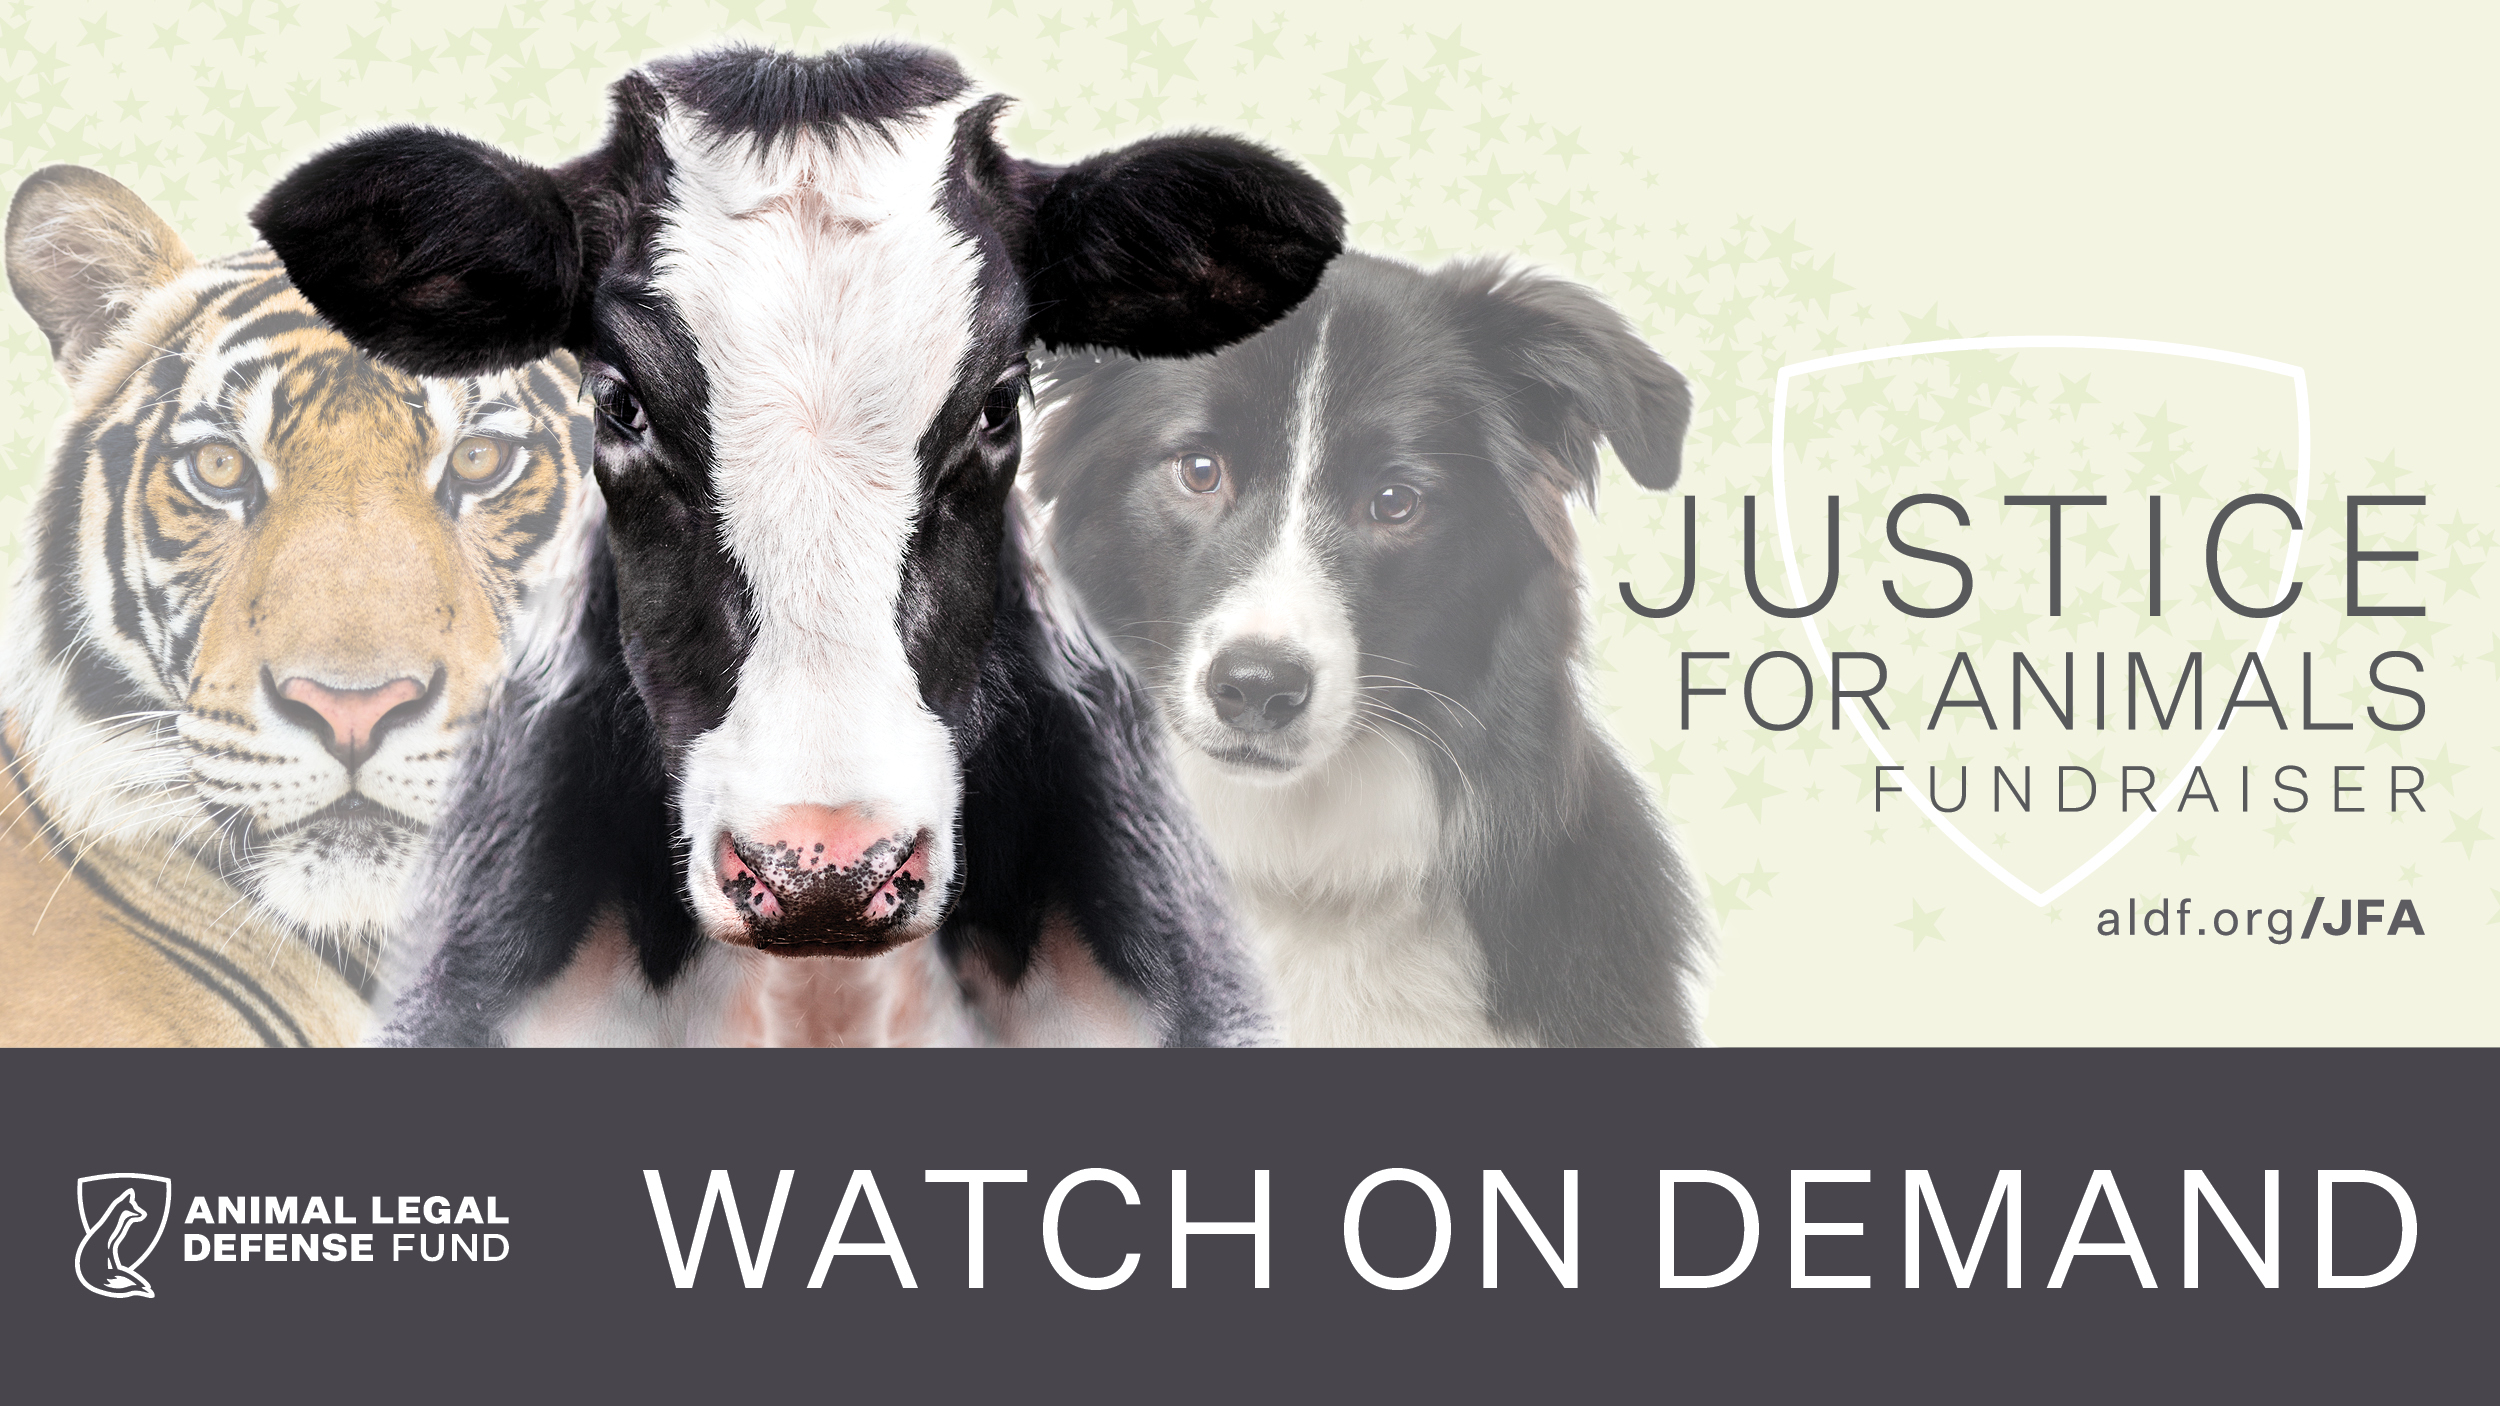 Justice for Animals Fundraiser 2022 - Animal Legal Defense Fund